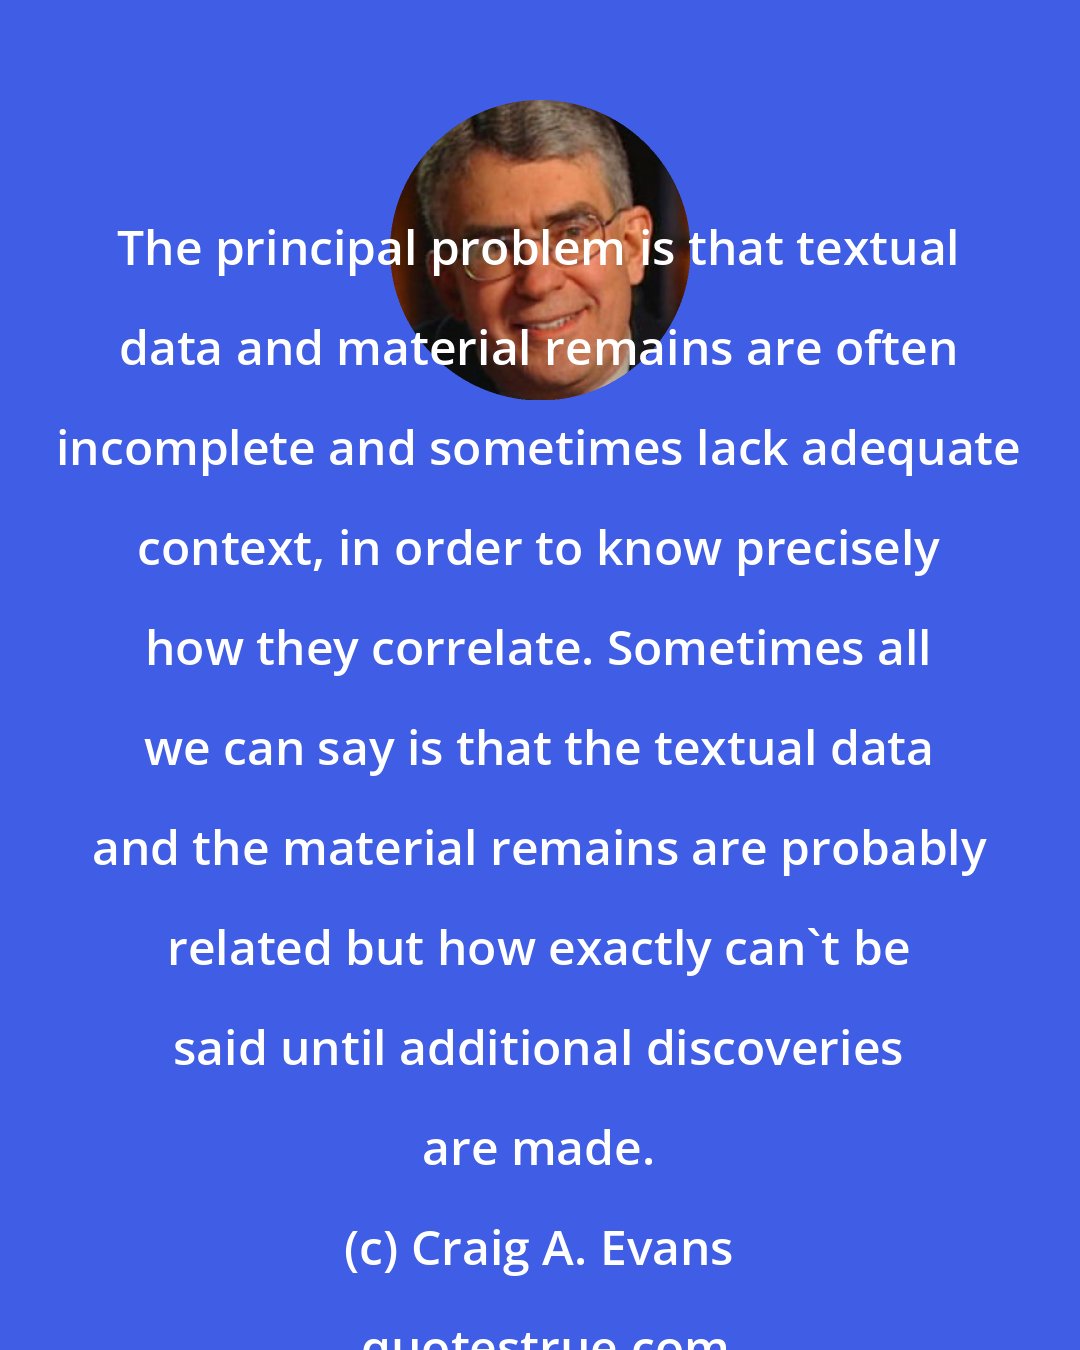 Craig A. Evans: The principal problem is that textual data and material remains are often incomplete and sometimes lack adequate context, in order to know precisely how they correlate. Sometimes all we can say is that the textual data and the material remains are probably related but how exactly can't be said until additional discoveries are made.